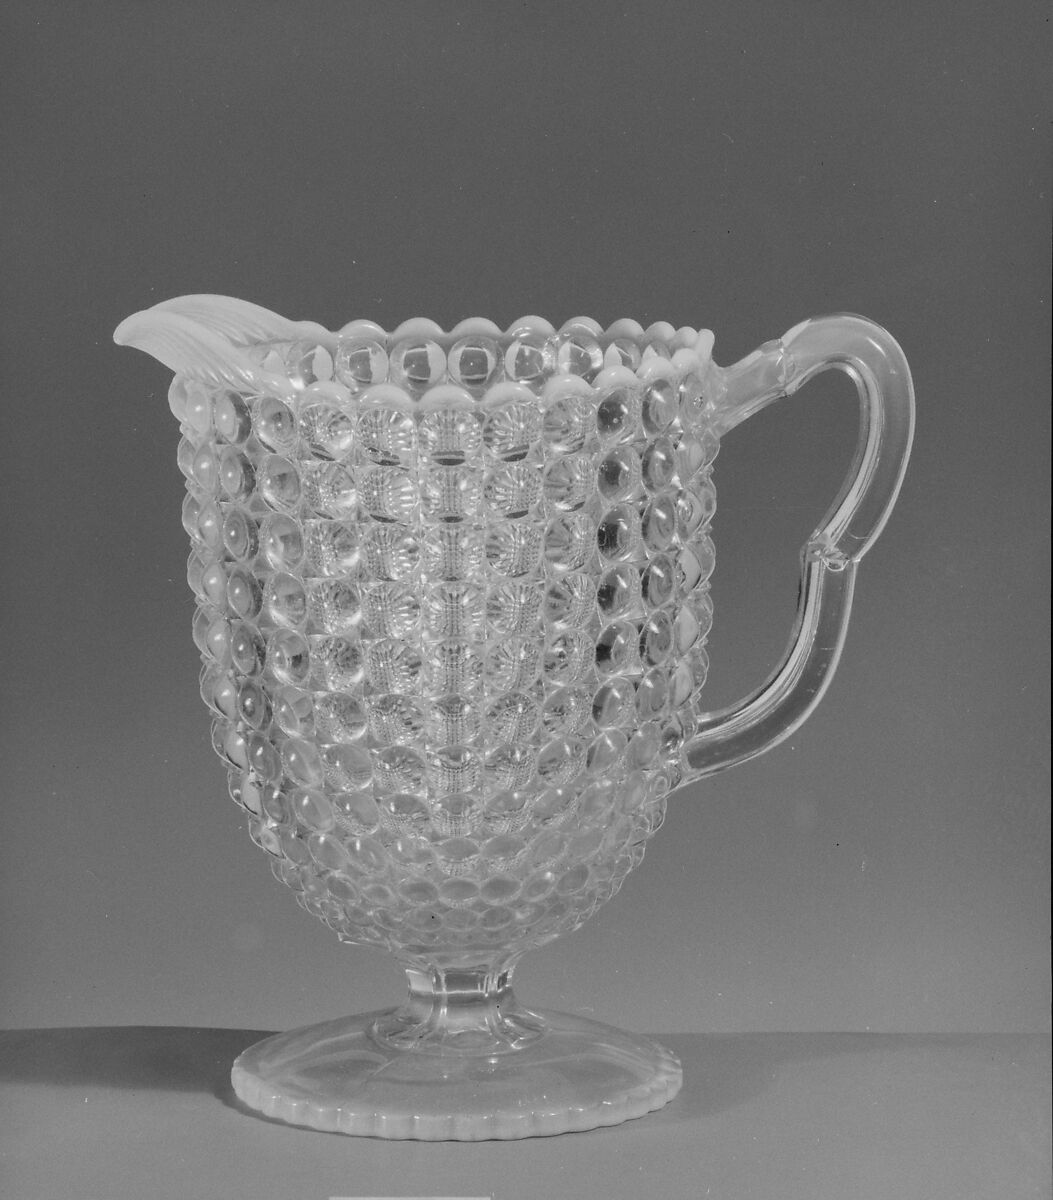 Water Pitcher, Richards and Hartley Flint Glass Co. (ca. 1870–1890), Pressed colorless and opalescent glass, American 